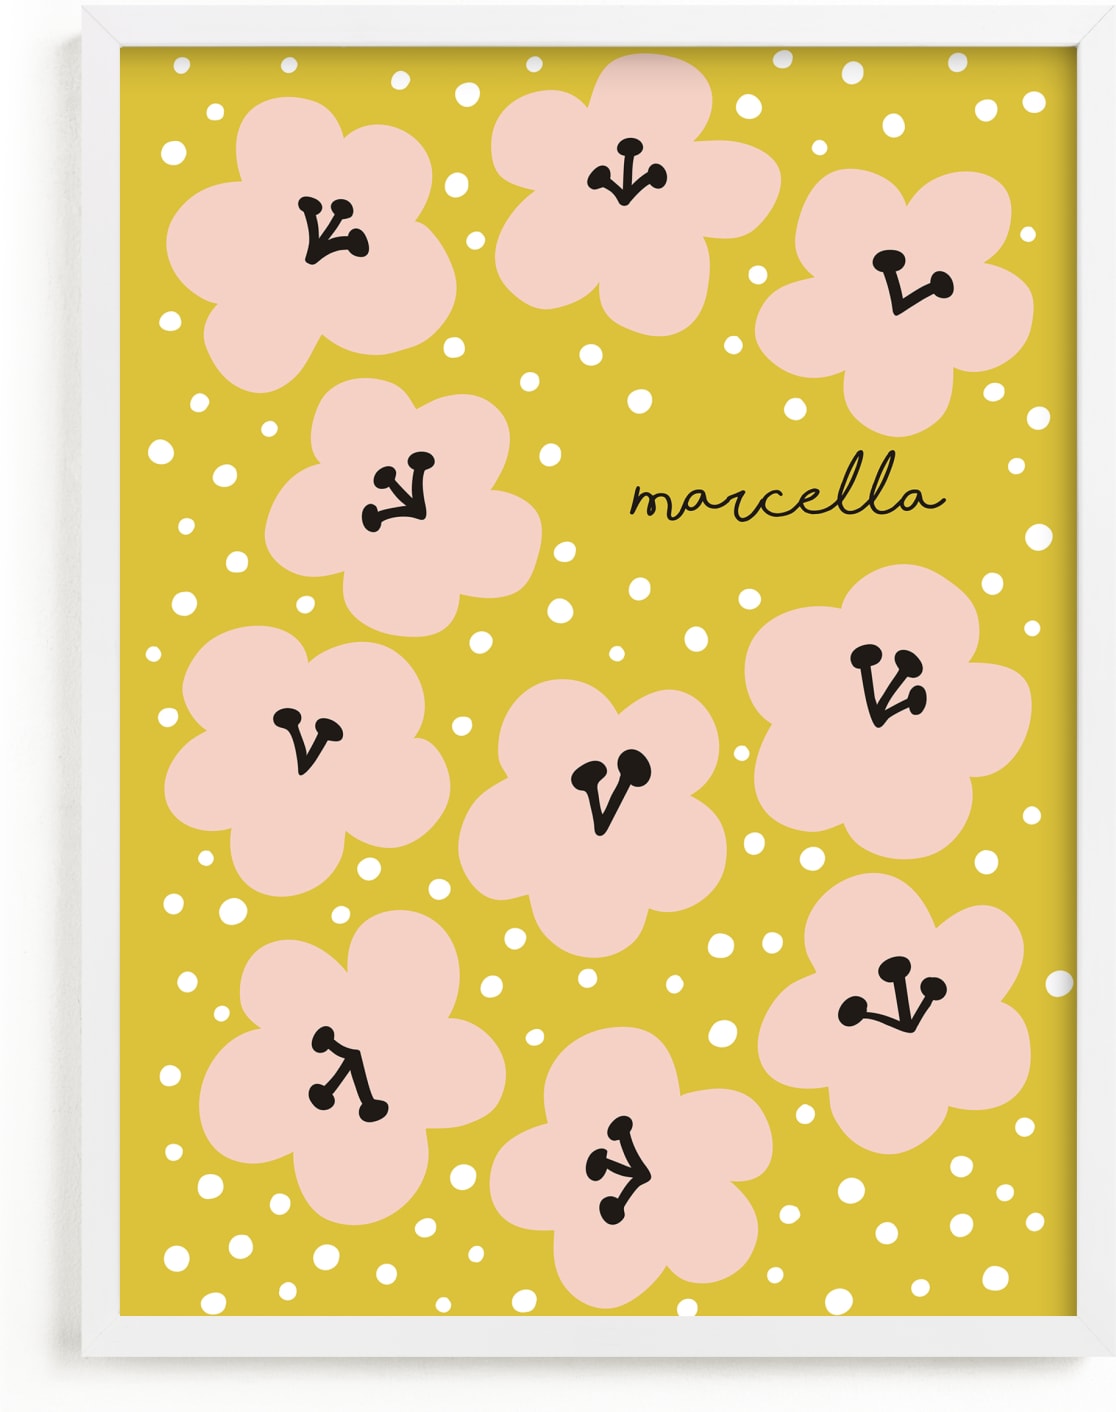 This is a yellow personalized art for kid by Nieves Herranz called Marcella.